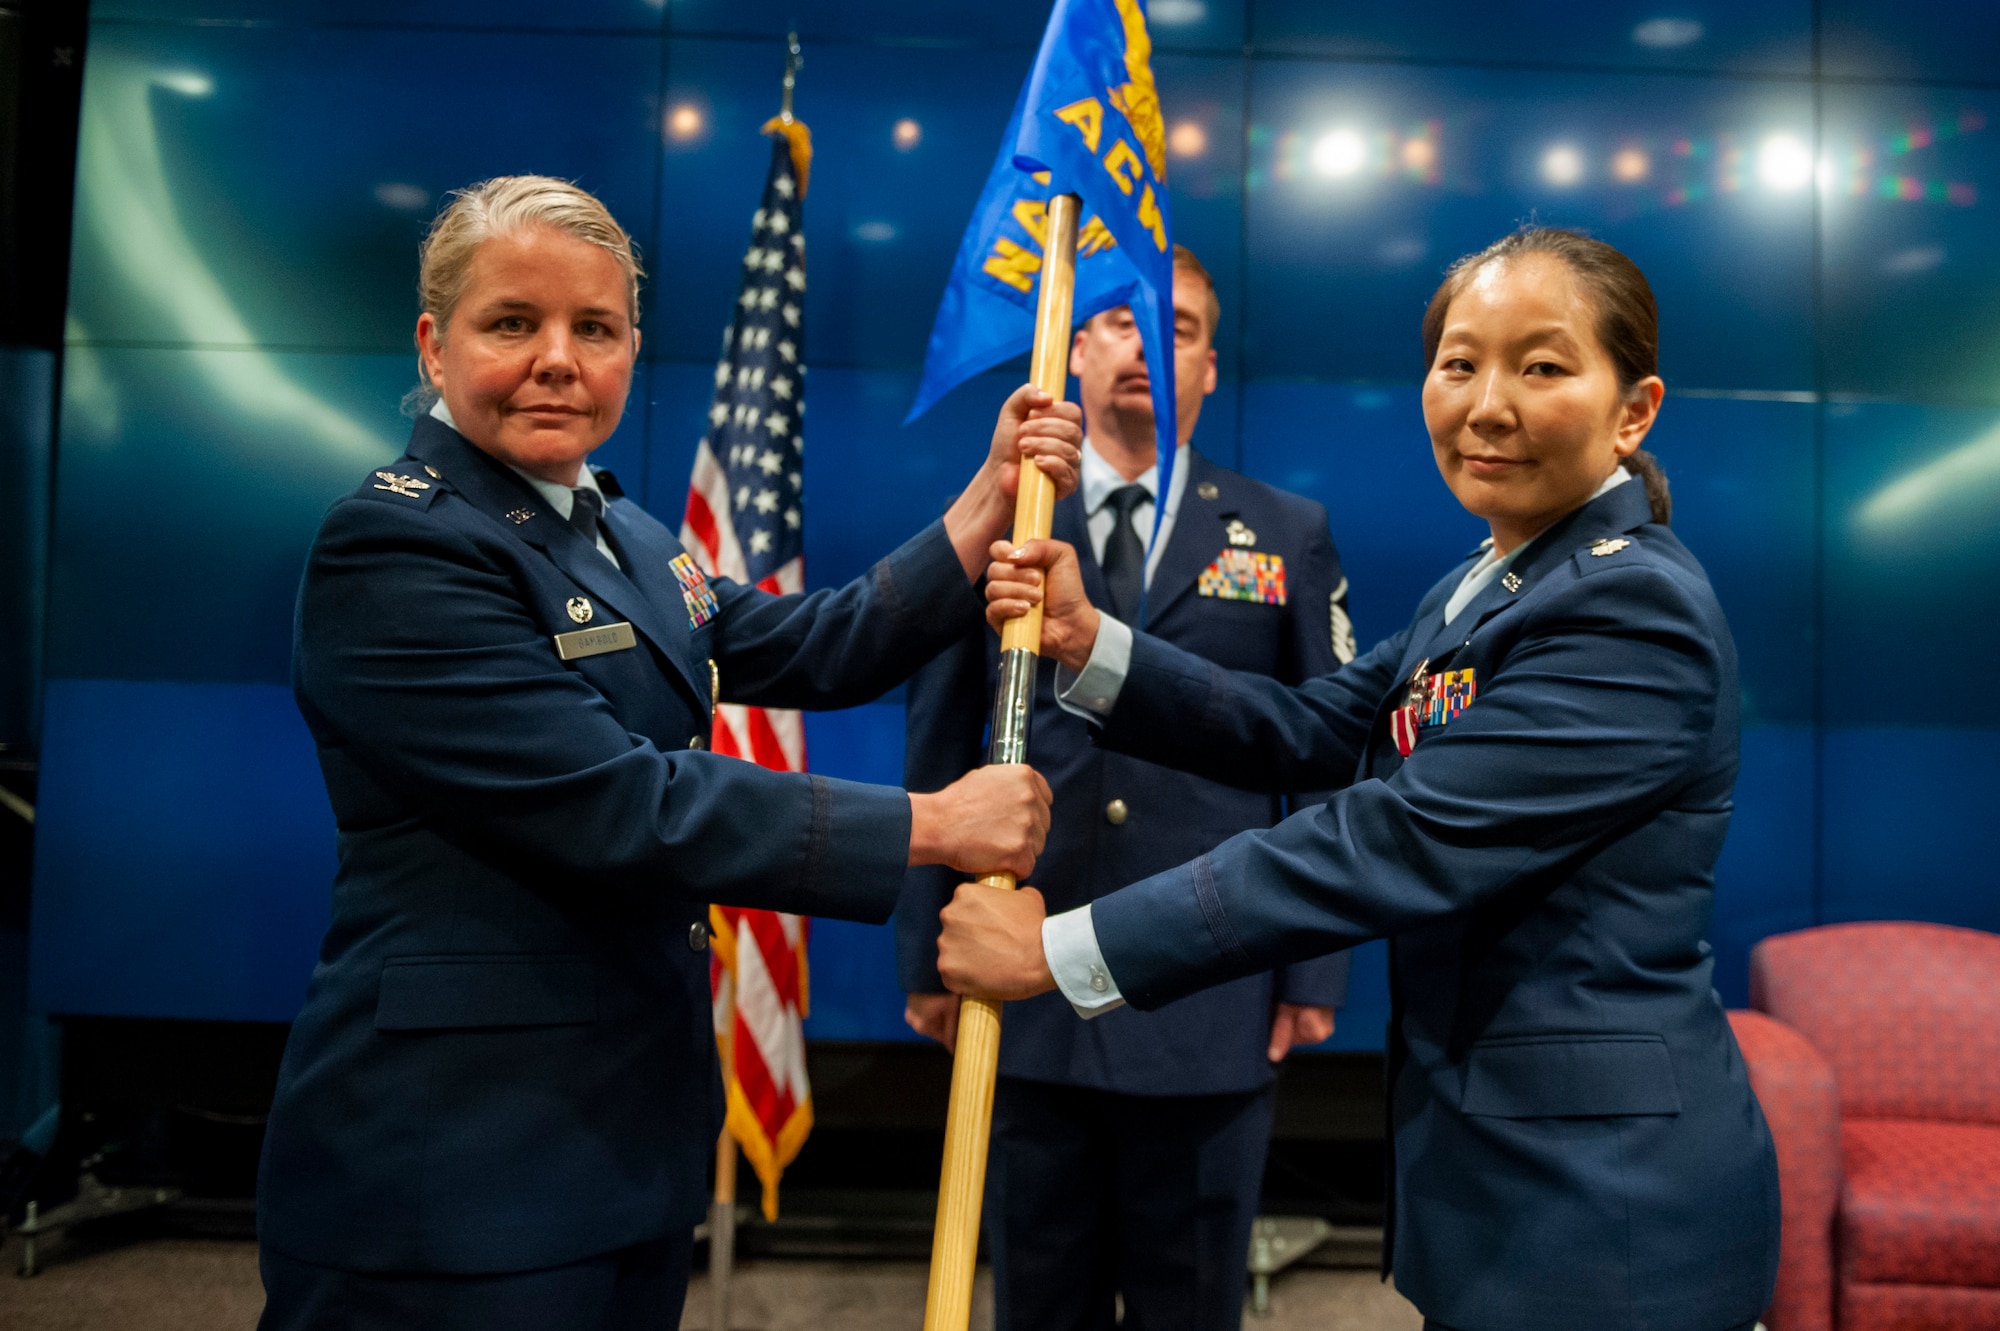 Col. Catherine A. Gambold, Air and Cyberspace Intelligence Group commander, passes the guidon to Lt. Col. Melissa H. Keown, outbound Information Warfare Analysis Squadron commander, during the squadron’s change of command ceremony June 29 at the Air Force Institute of Technology, Wright-Patterson Air Force Base, Ohio. The change of command ceremony is one of the most significant of all military ceremonies. All authority and responsibility for command are vested in the hands of the commander, a chain unbroken to the Commander-in-Chief, the President of the United States. No unit shall ever, even for a brief moment, be without a commander. (U.S. Air Force photo by Senior Airman Kristof J. Rixmann)